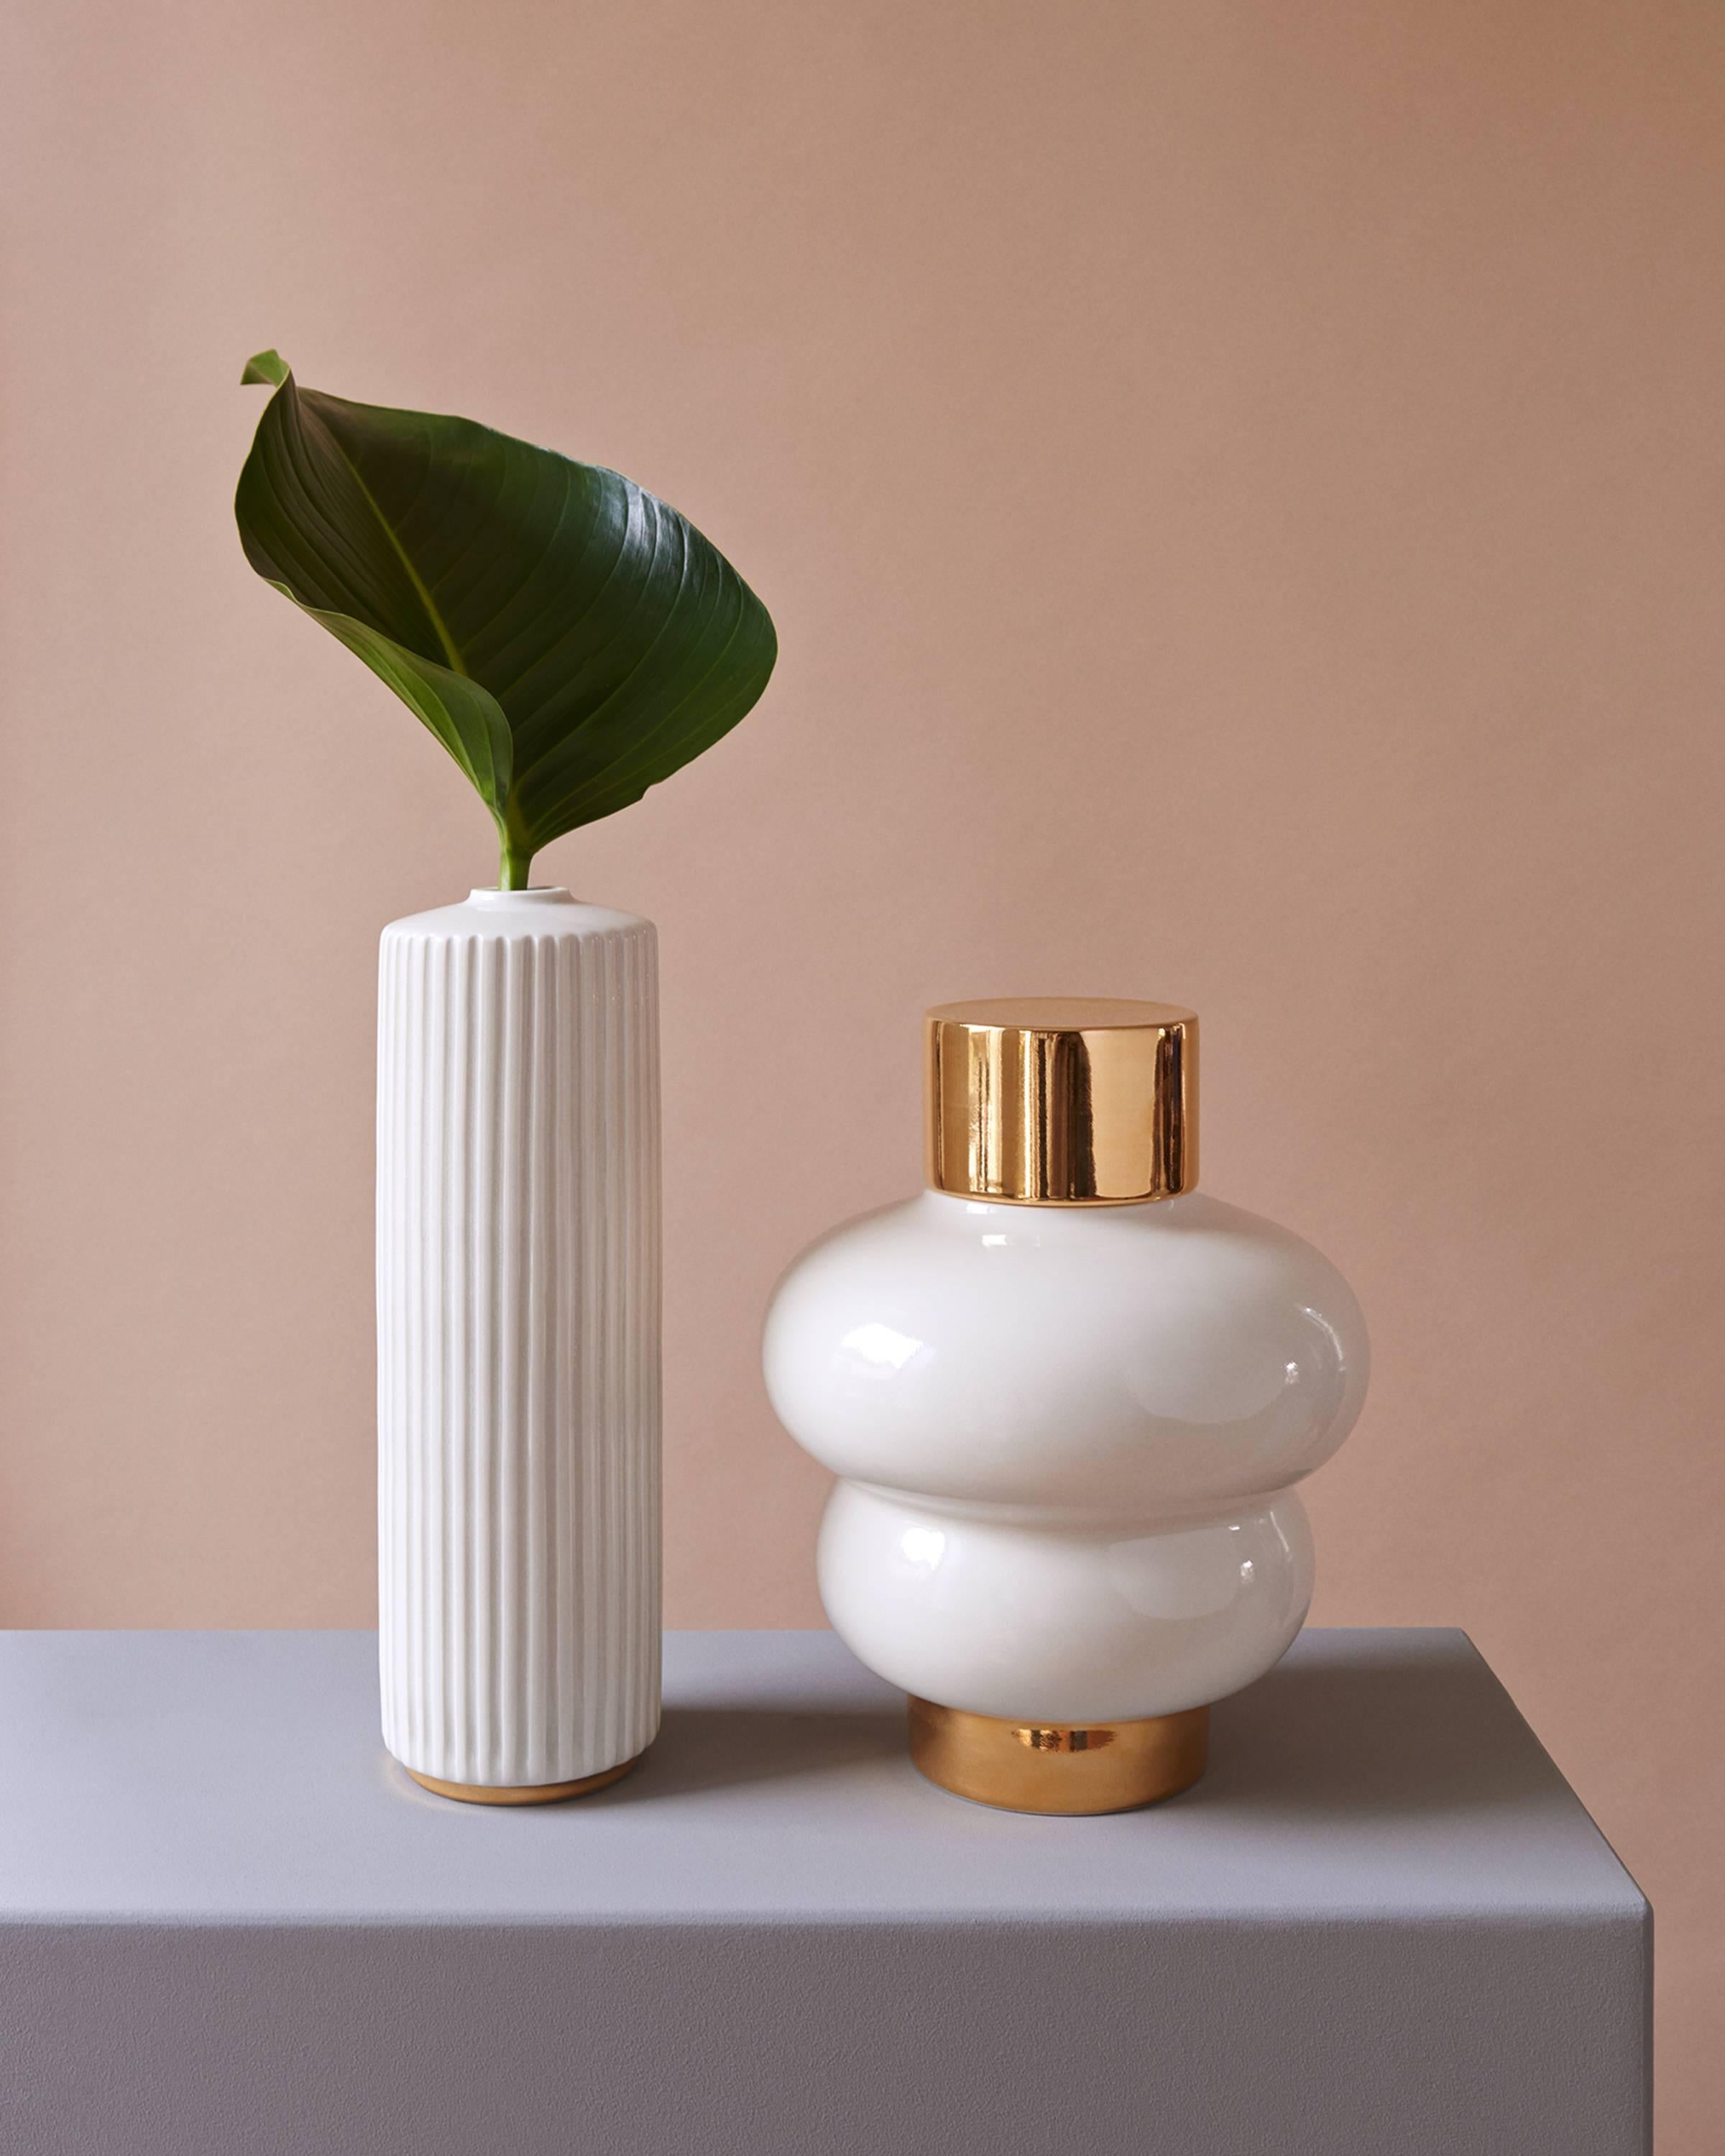 This hand-thrown porcelain Vase is a contemporary and functional stand out piece.  
The vase is made of glossy white porcelain with a 24k gold base. The vase has a size of Diameter 25cm, Height 33cm. 

The first ATLAS CRAFTS collection is thrown by